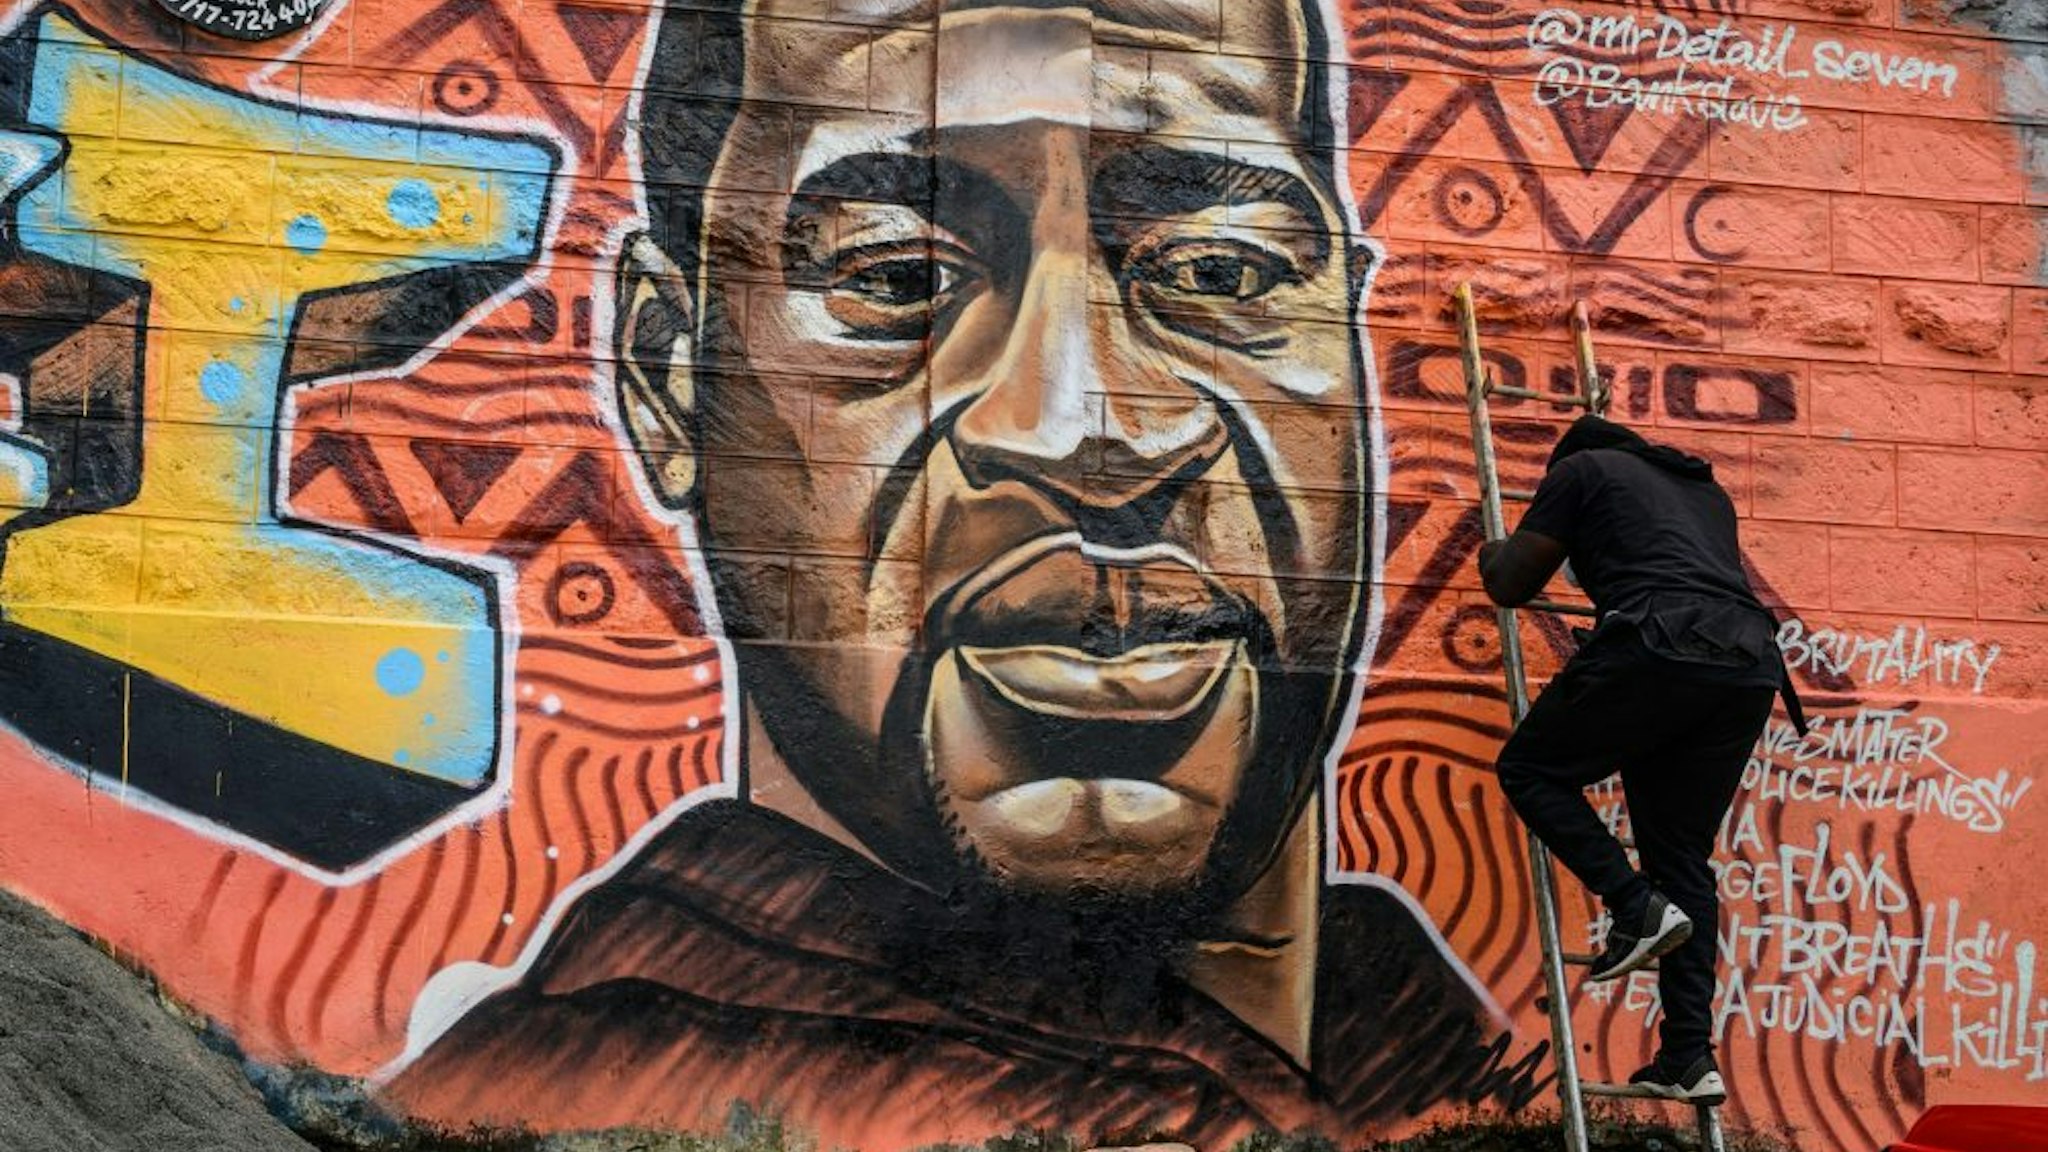 Kenyan mural artist Allan Mwangi, also known as Mr.detail.seven, paints a graffiti mural in the Kibera slum in Nairobi on June 3, 2020, depicting the American, George Floyd, who was killed by a police officer in Minneapolis, in the United States.